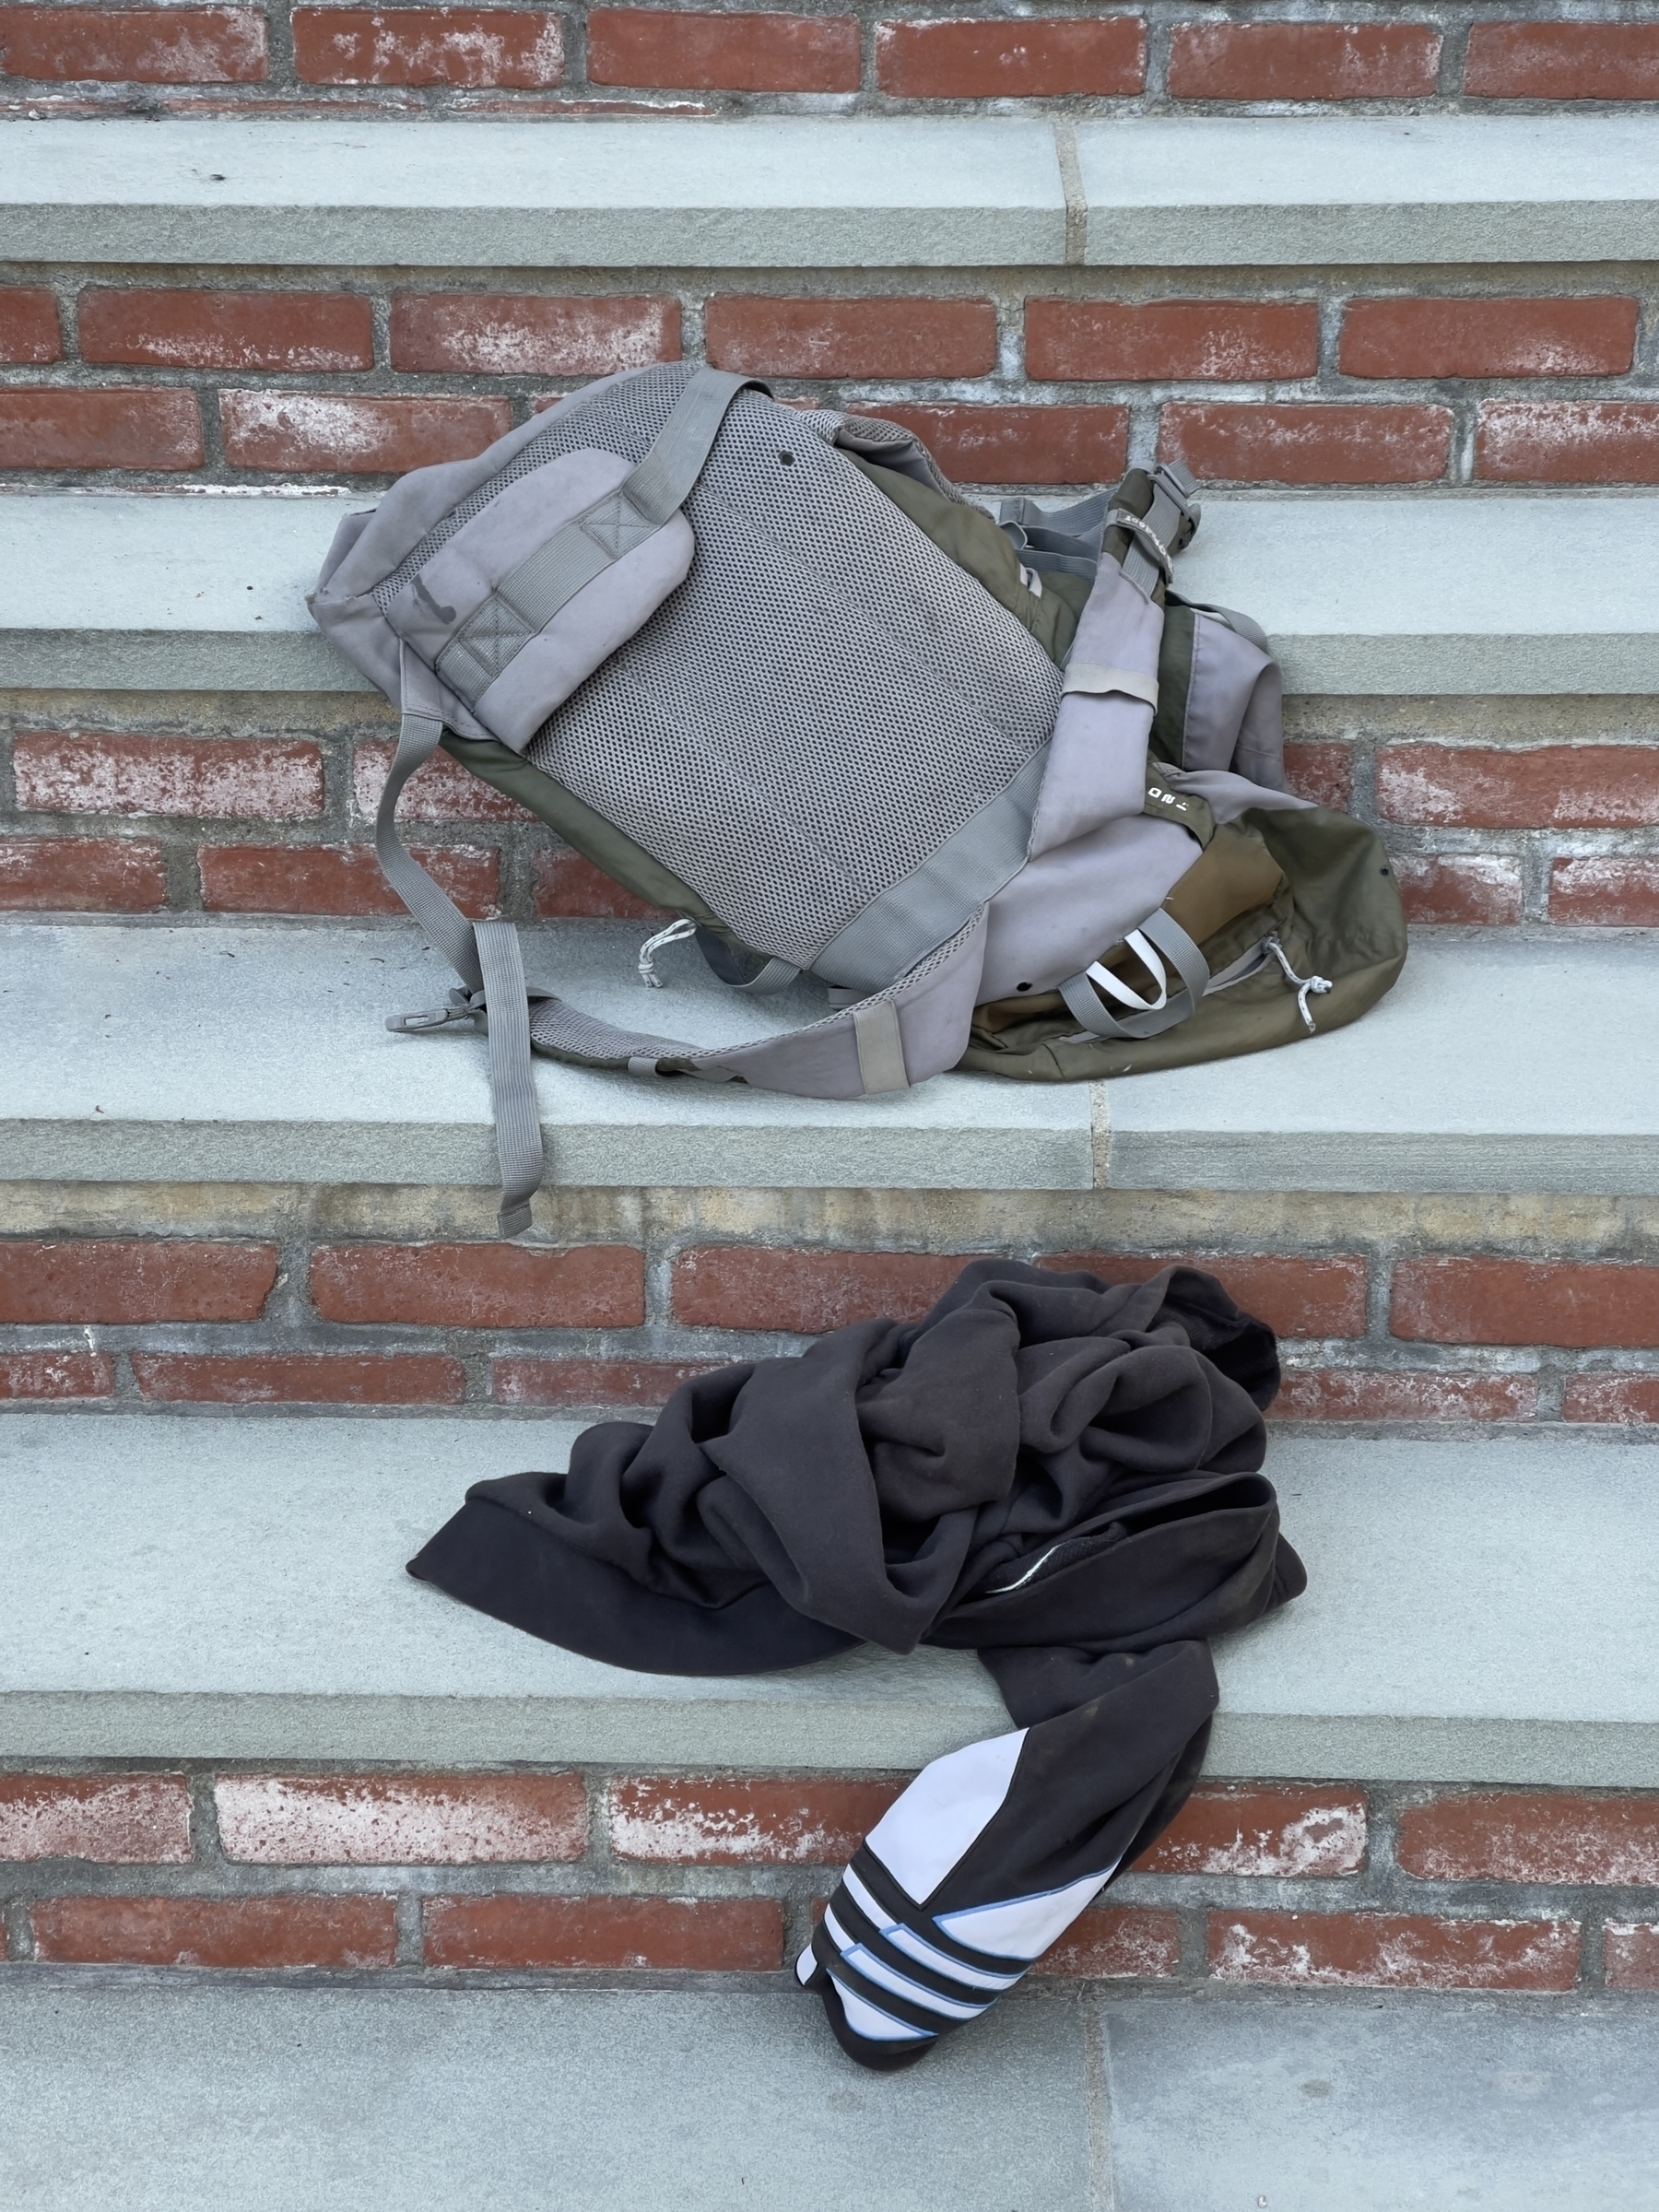 Backpack and jacket tossed onto stone and brick steps.